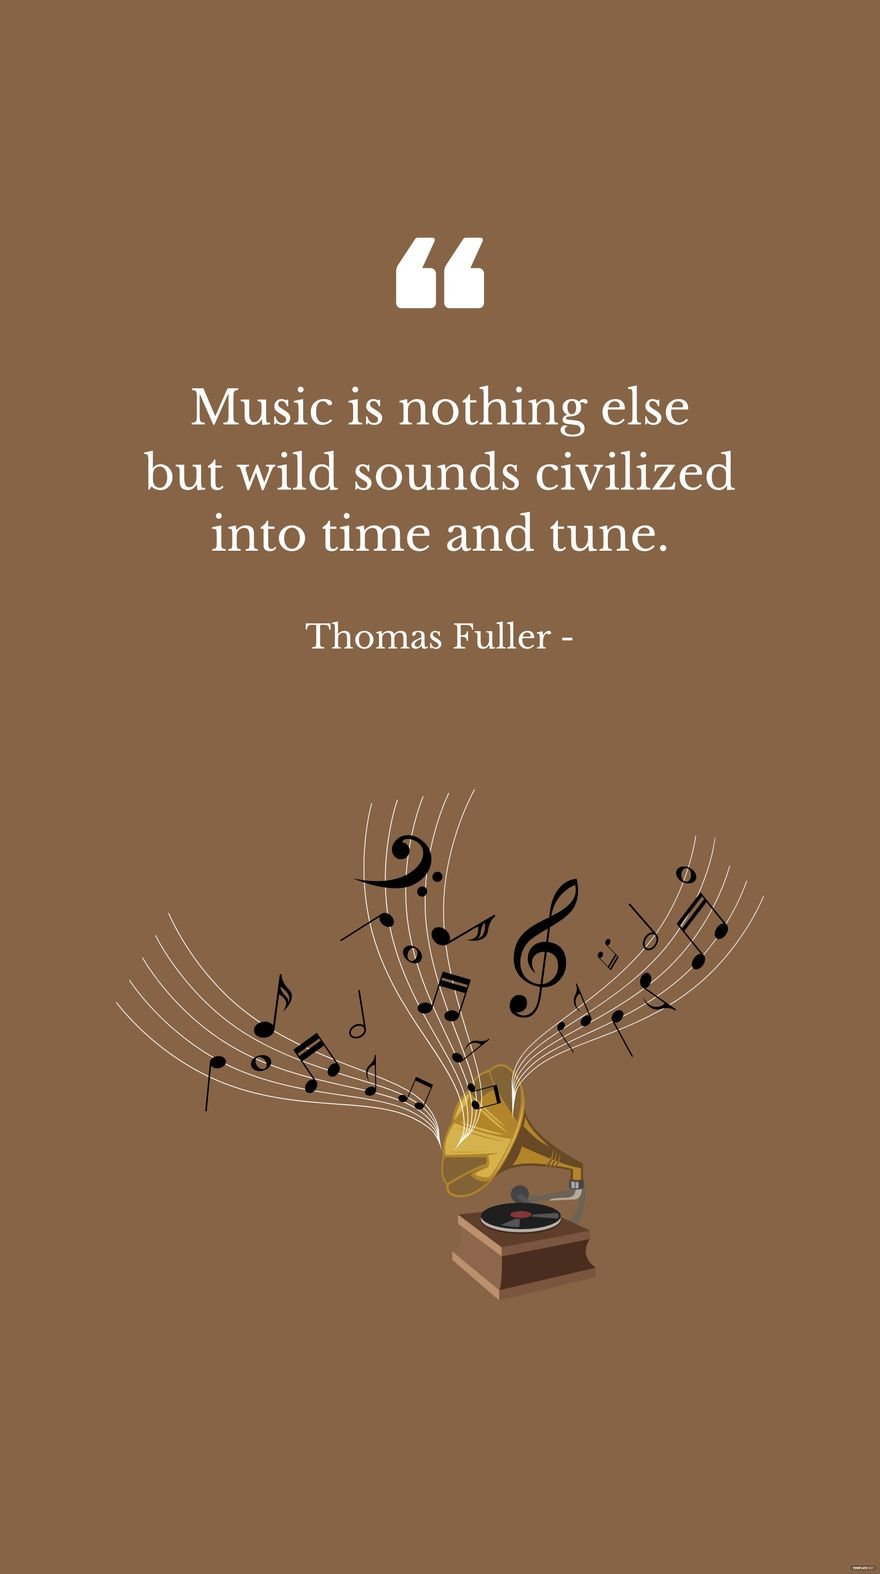 Free Thomas Fuller - Music is nothing else but wild sounds civilized into time and tune. in JPG